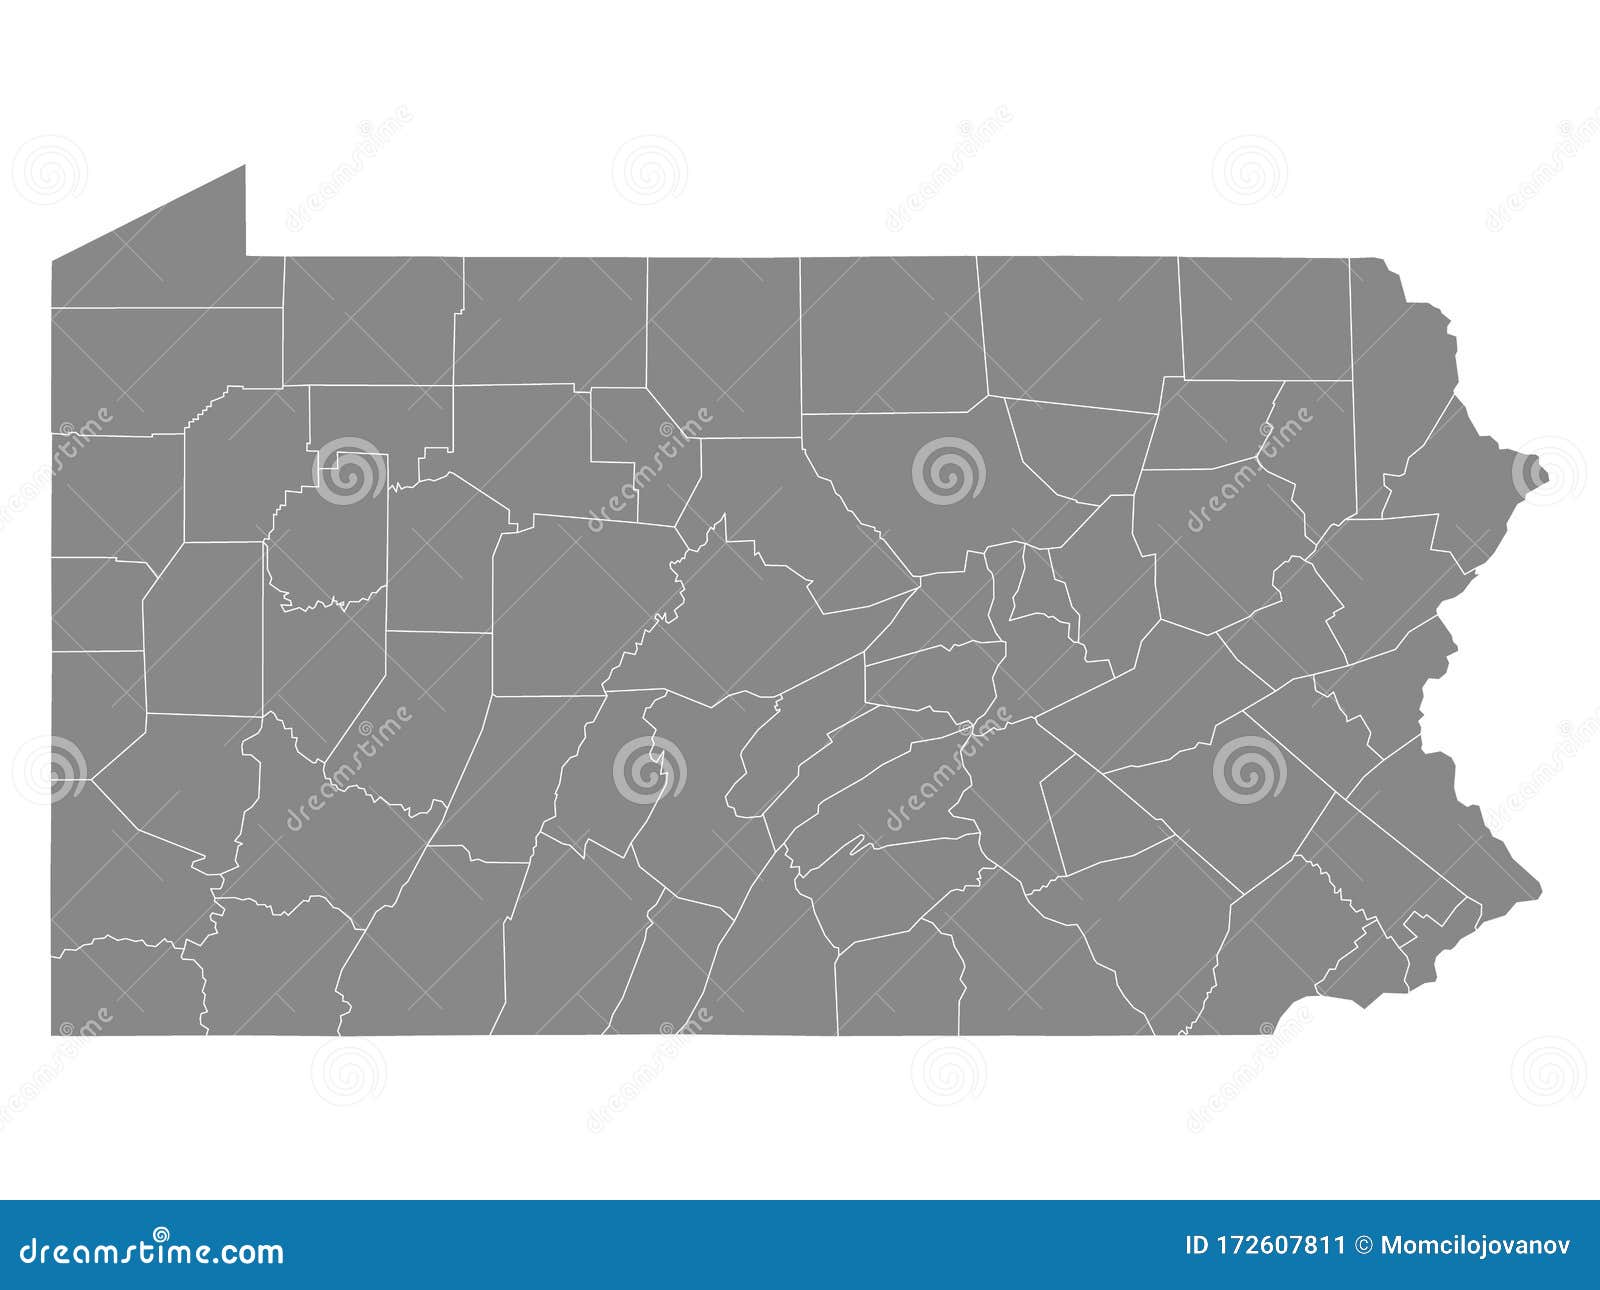 counties map of us state of pennsylvania